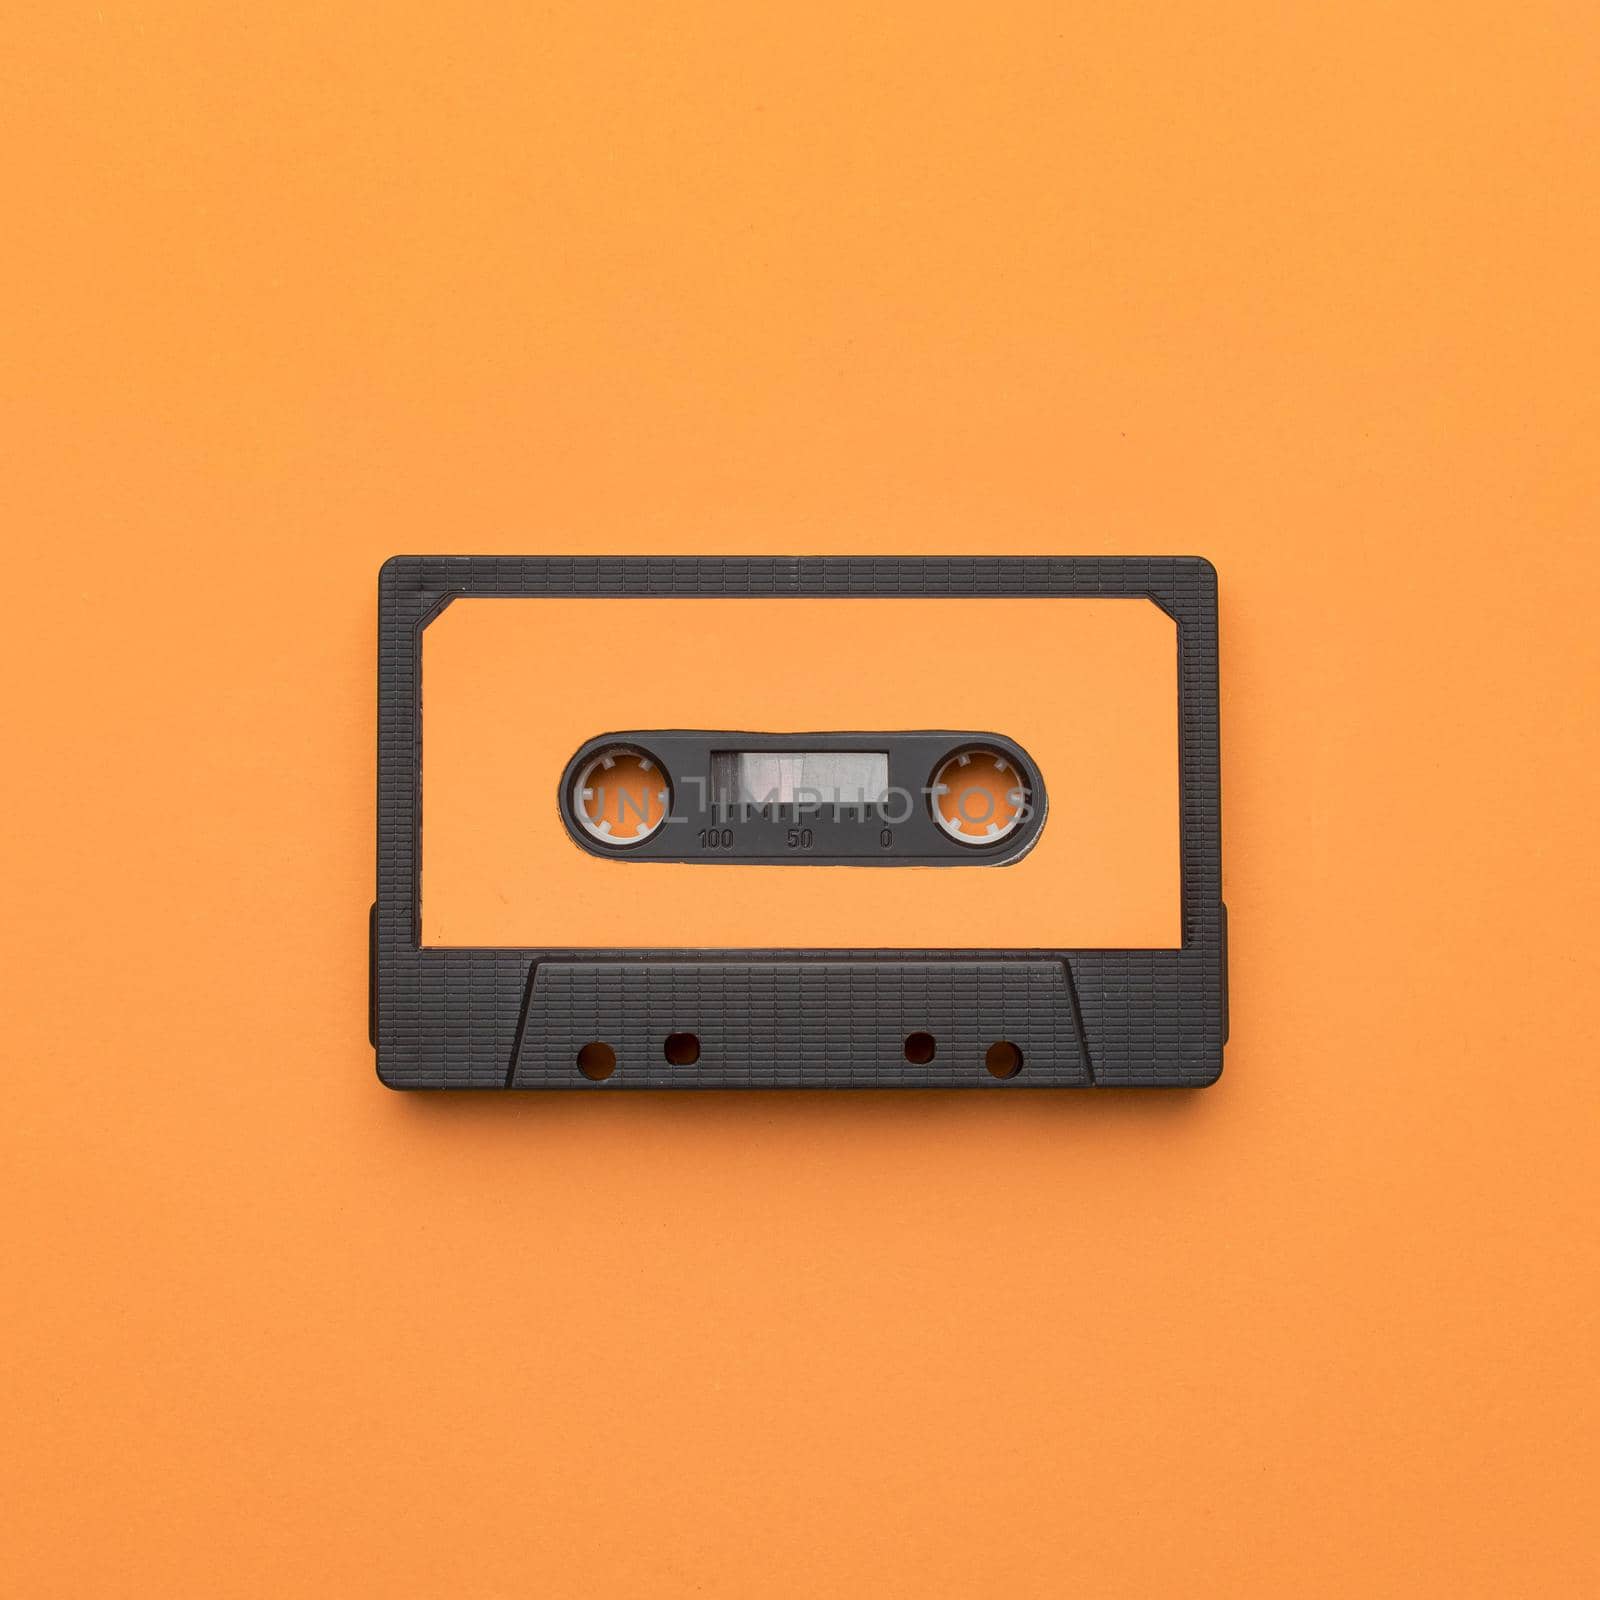 vintage cassette tape orange background. High quality beautiful photo concept by Zahard